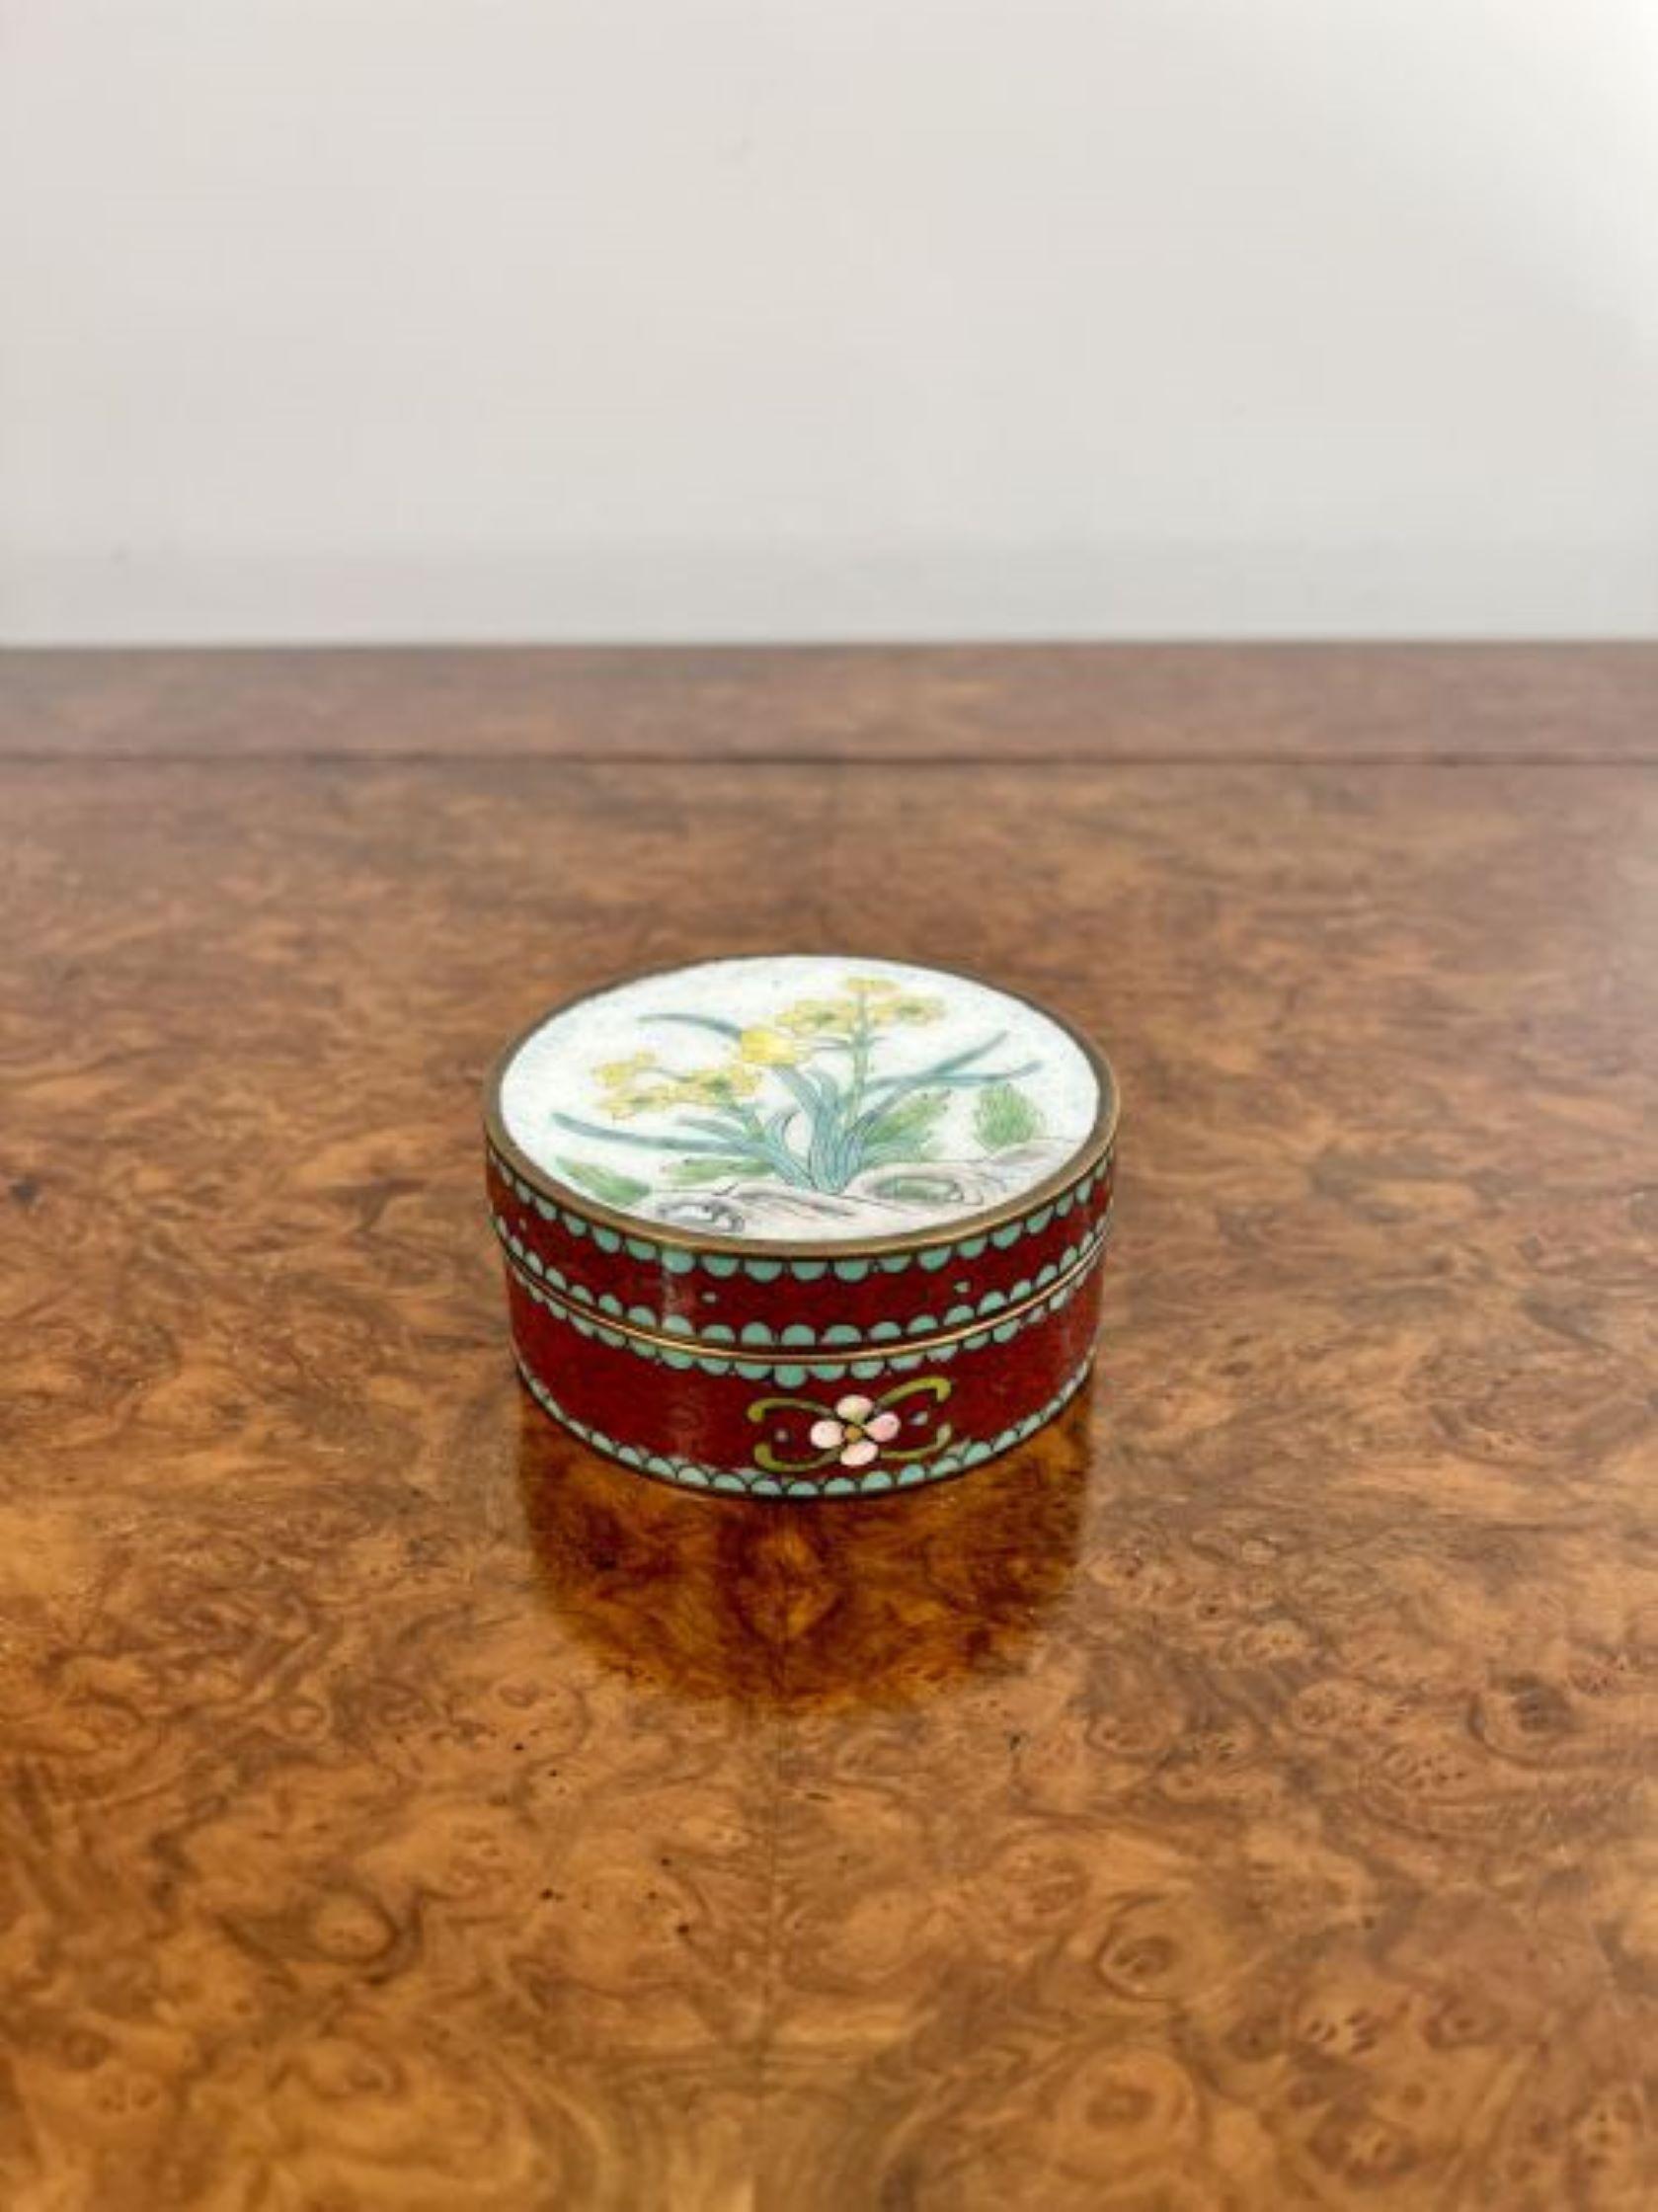 Antique Edwardian quality Chinese cloisonné circular trinket box having a quality antique Edwardian Chinese cloisonné circular trinket box with a lift off lid decorated with yellow flowers and green leaves.